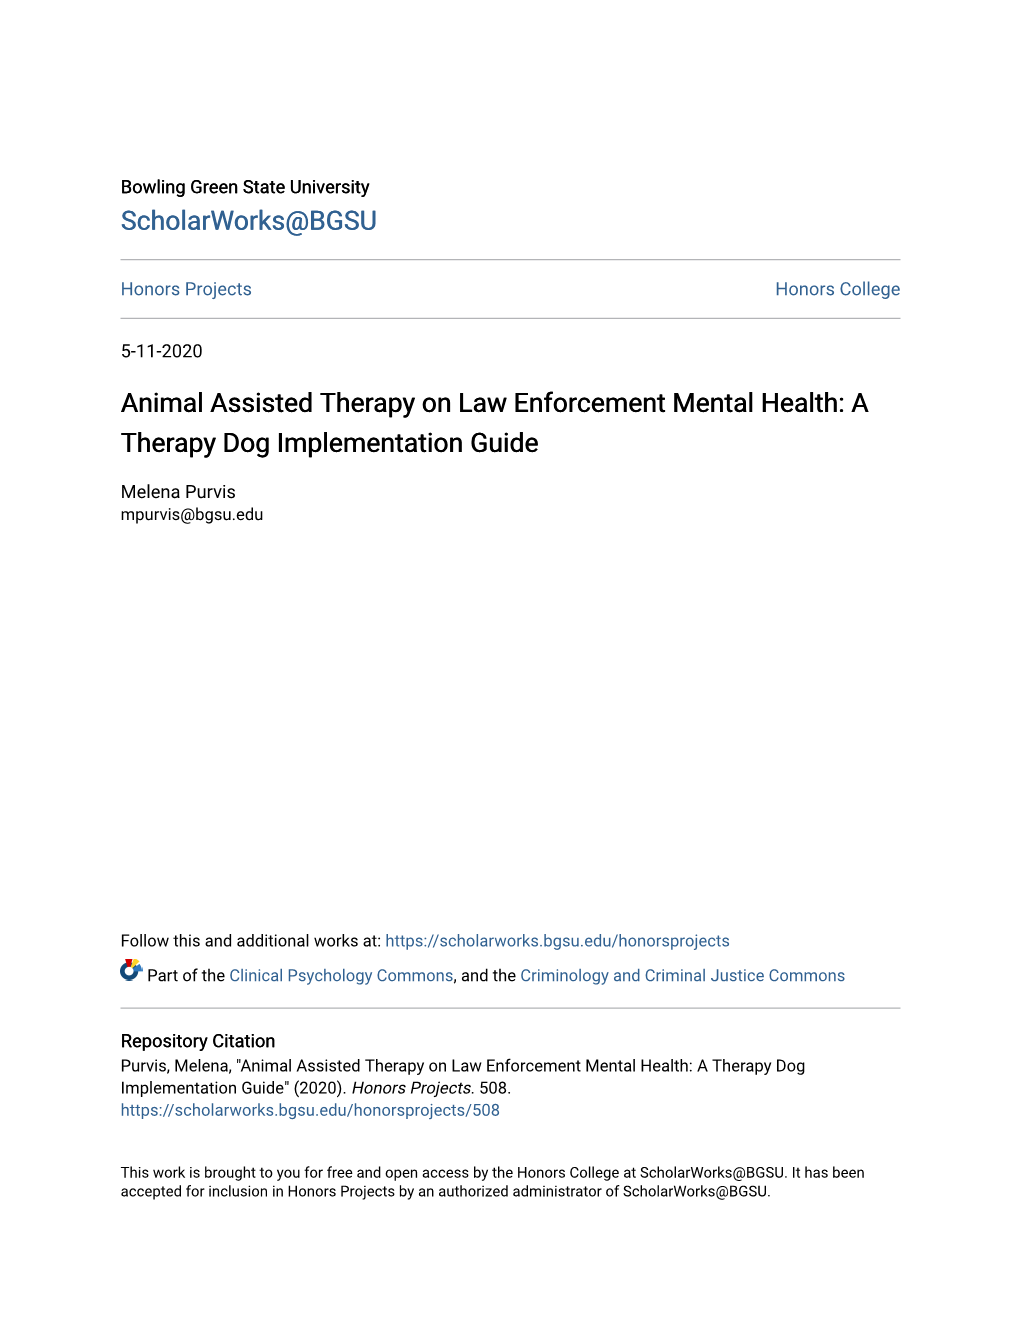 Animal Assisted Therapy on Law Enforcement Mental Health: a Therapy Dog Implementation Guide